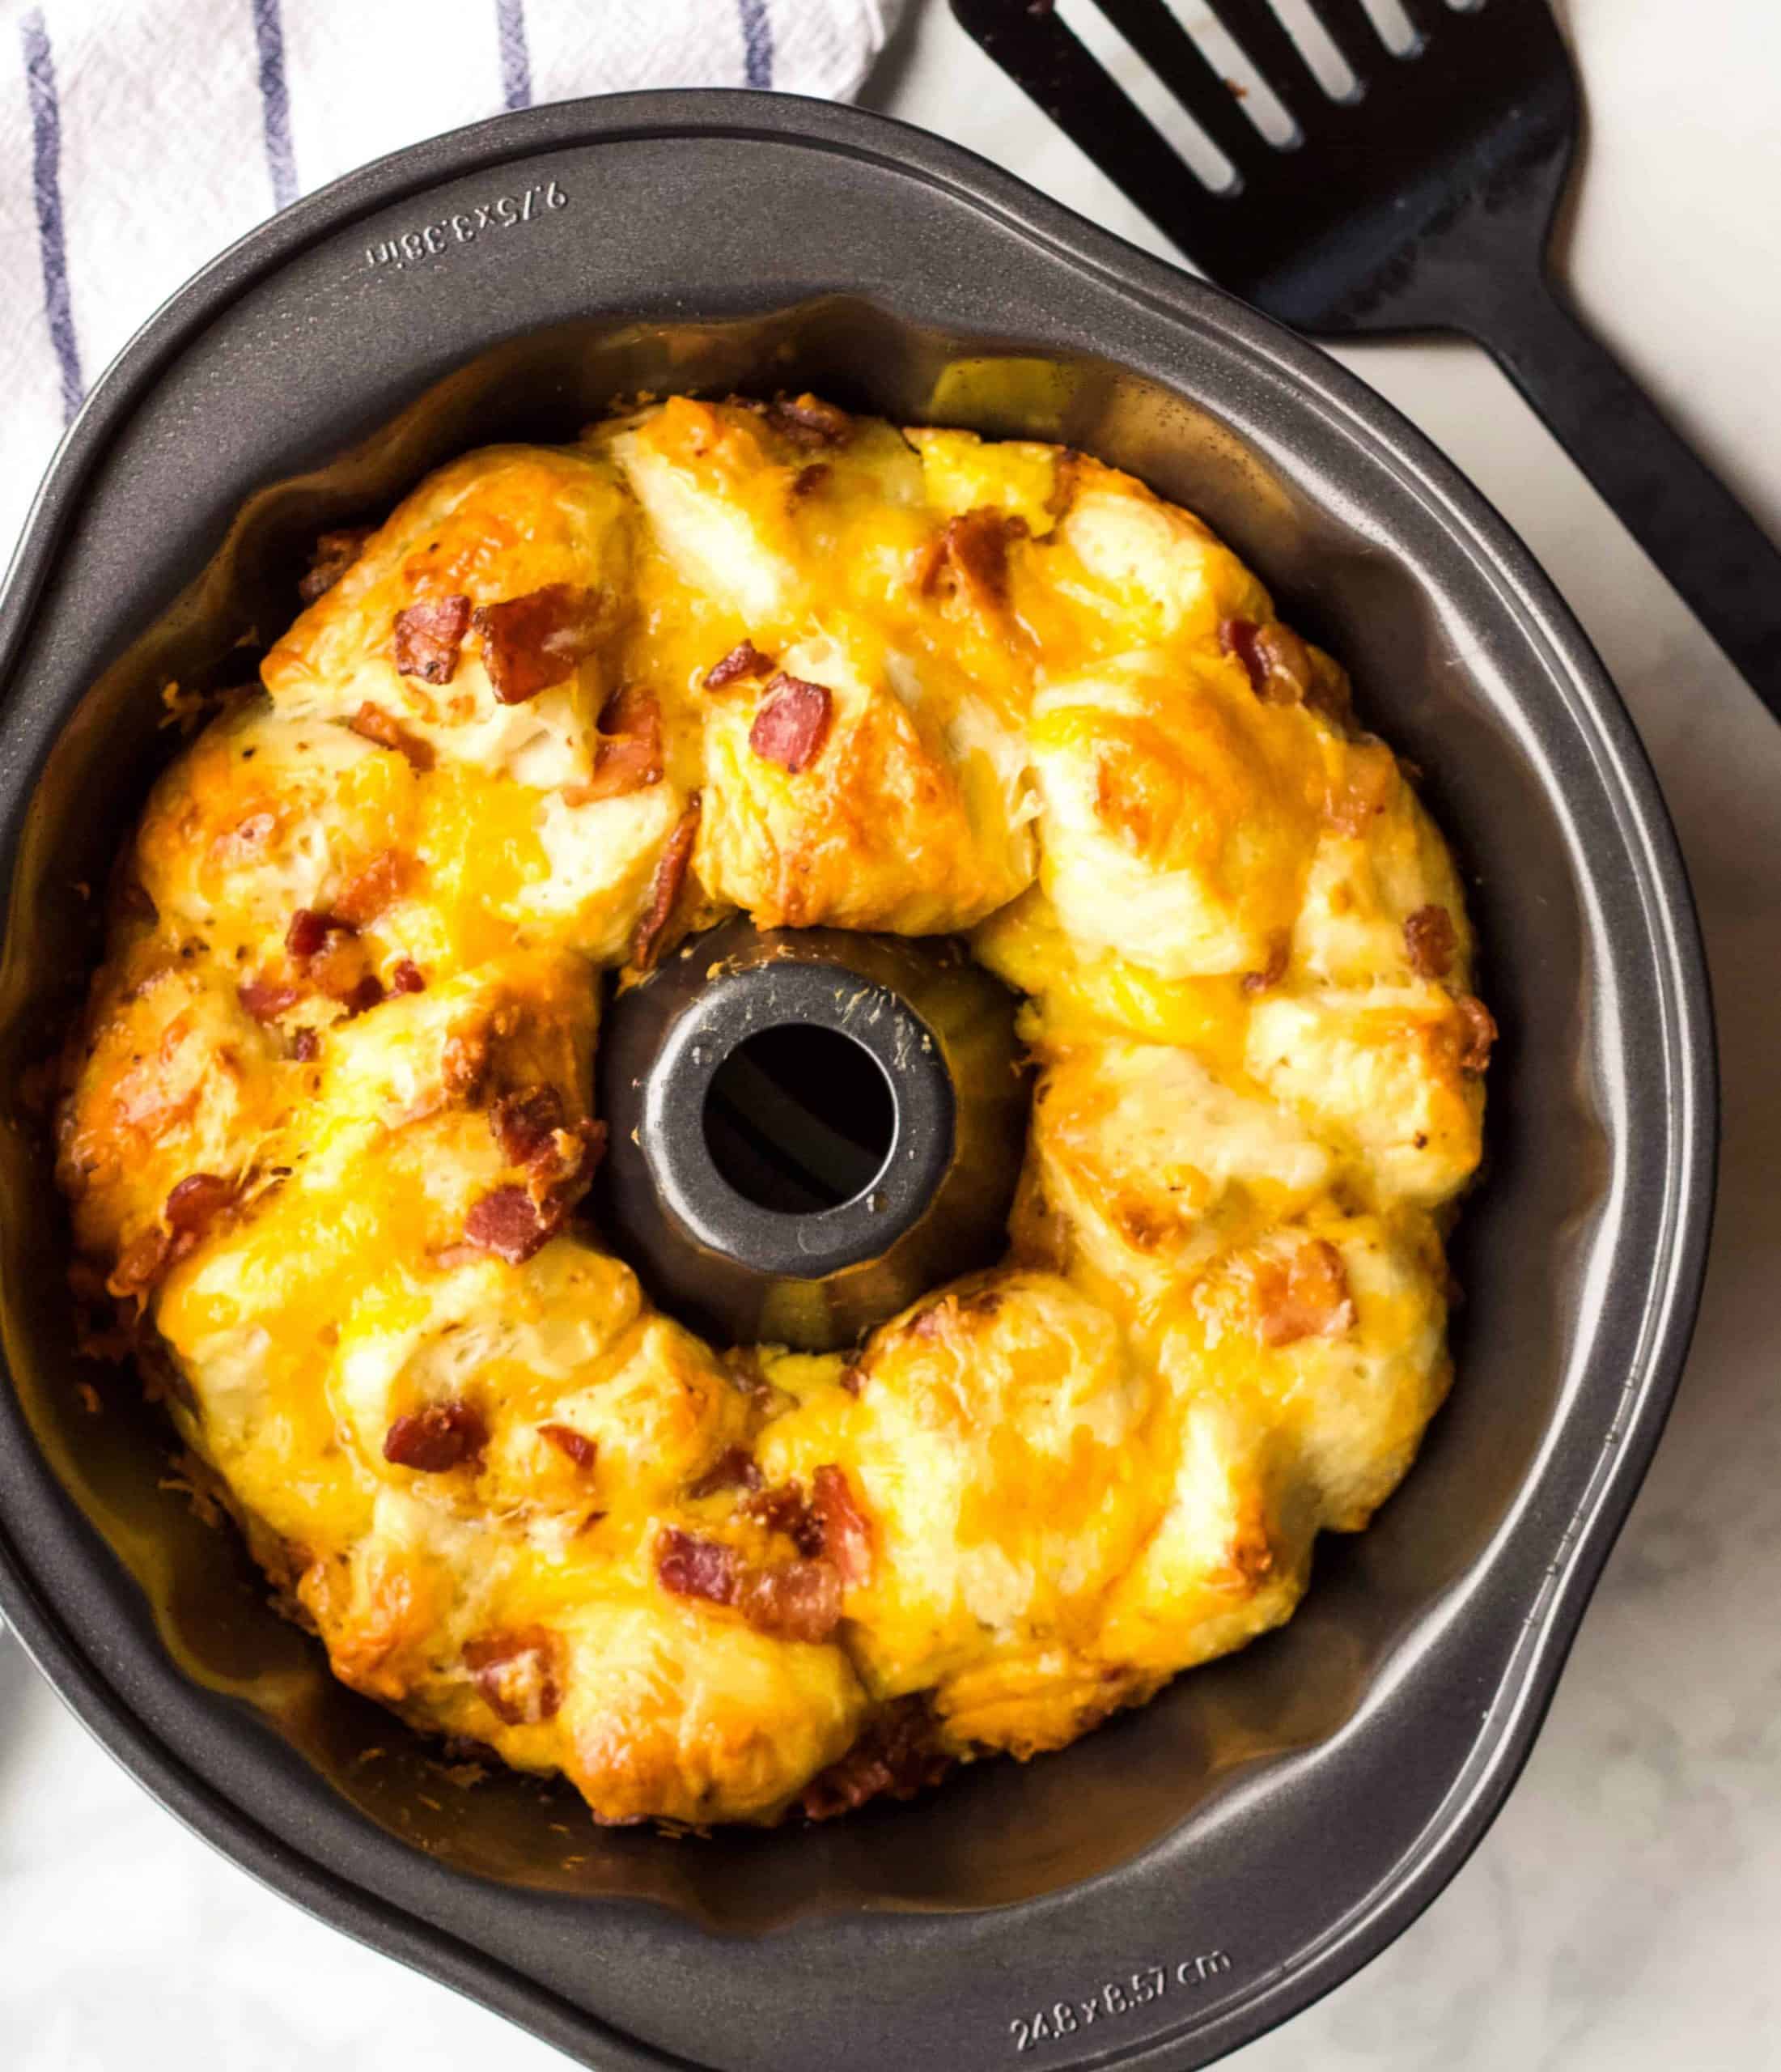 https://deliciousmadeeasy.com/wp-content/uploads/2019/02/savory-monkey-bread-1-of-1-8-scaled.jpg